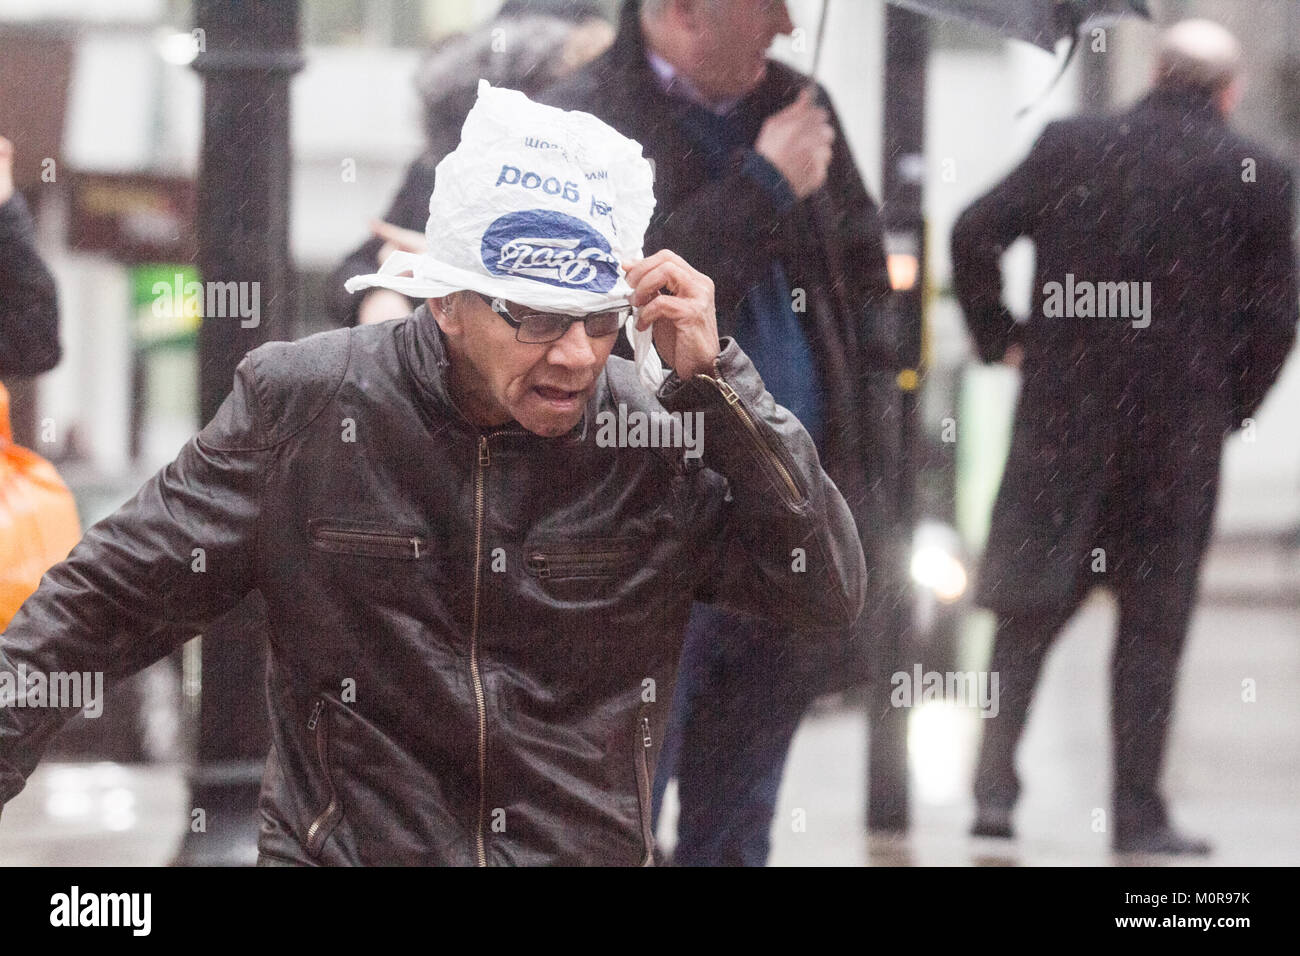 London UK. 24th January 2018. Pedestrians and shoppers are caught in heavy downpours and freezing rain in Wimbledon town centre brought about by Storm Georgina Credit: amer ghazzal/Alamy Live News Stock Photo